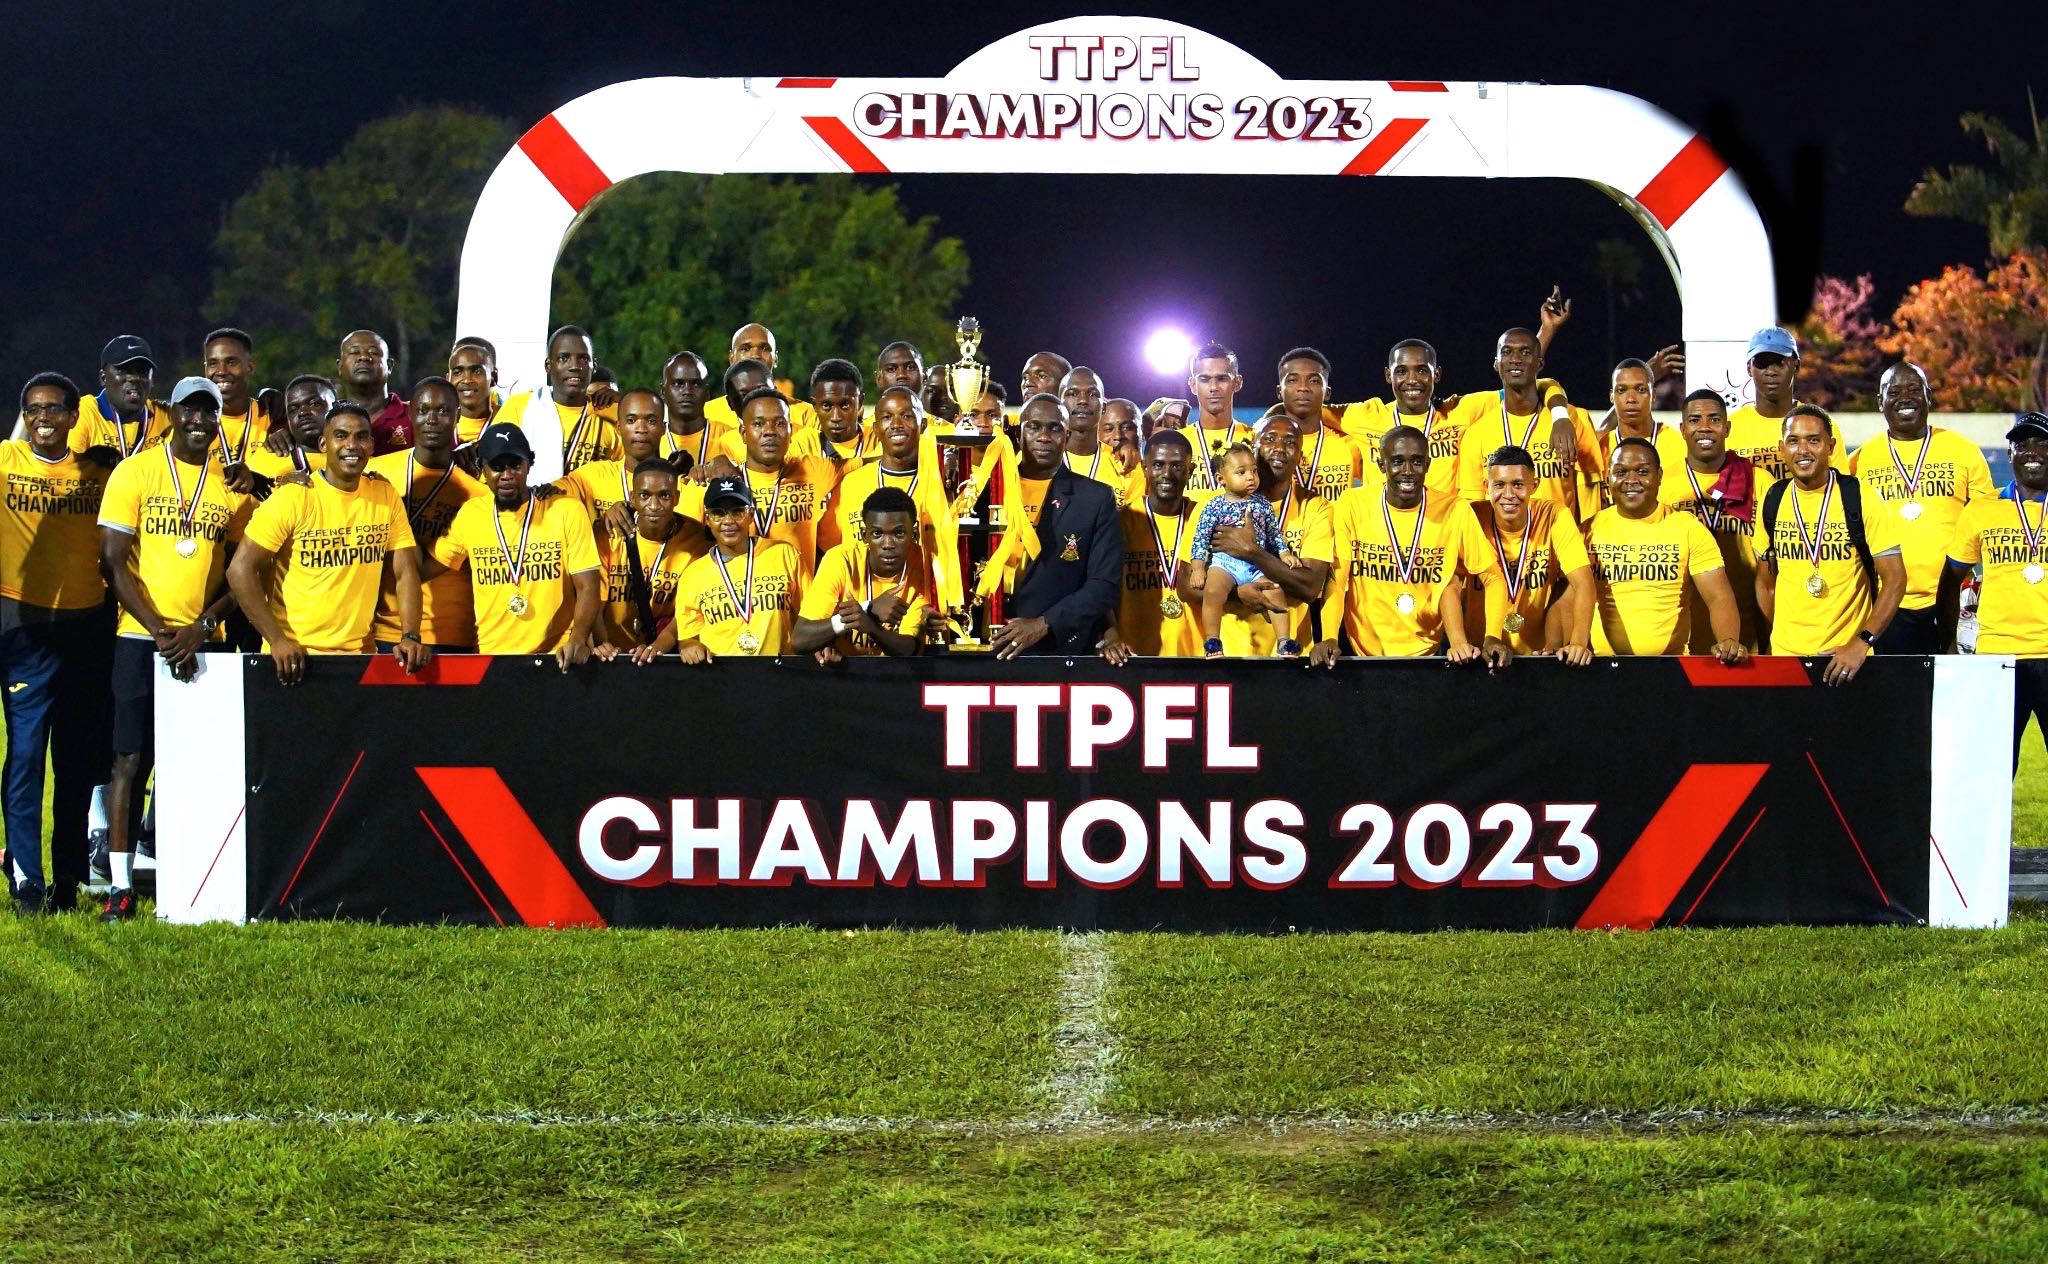 Army determined to hold on to TTPFL crown.